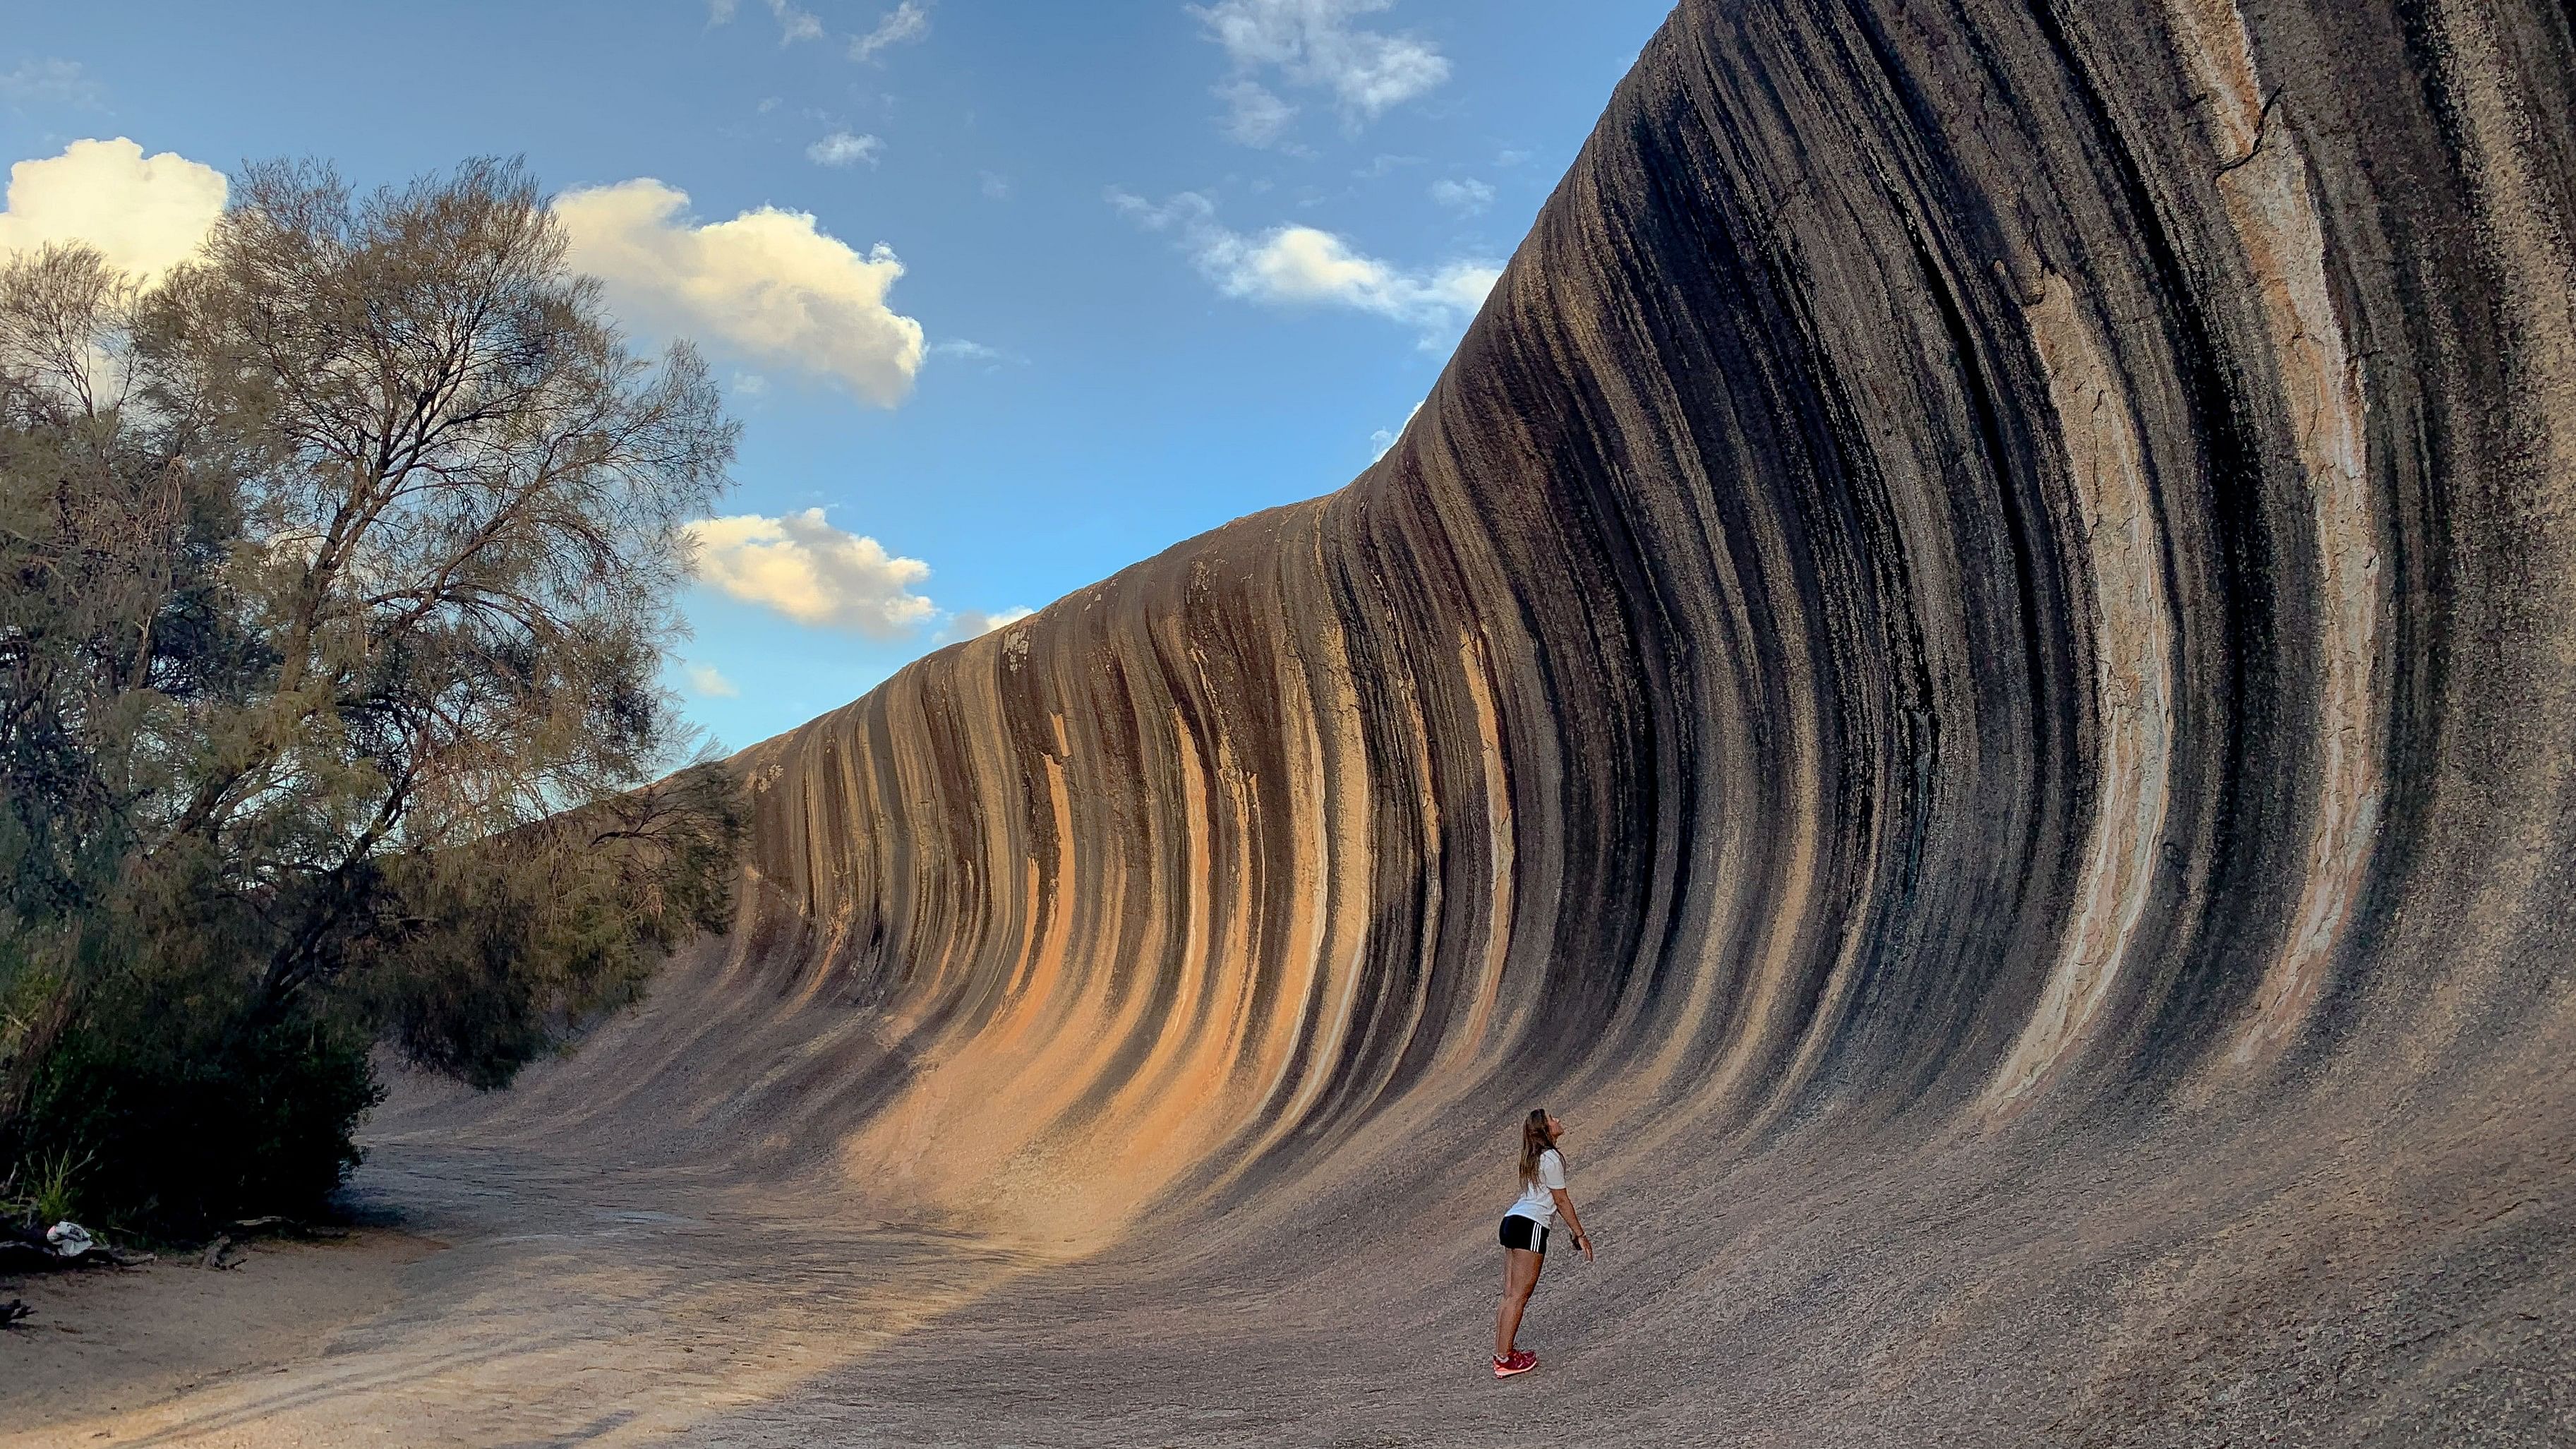 Wave Rock is an ancient geological formation that resembles a breaking wave. PHOTO BY AUTHOR